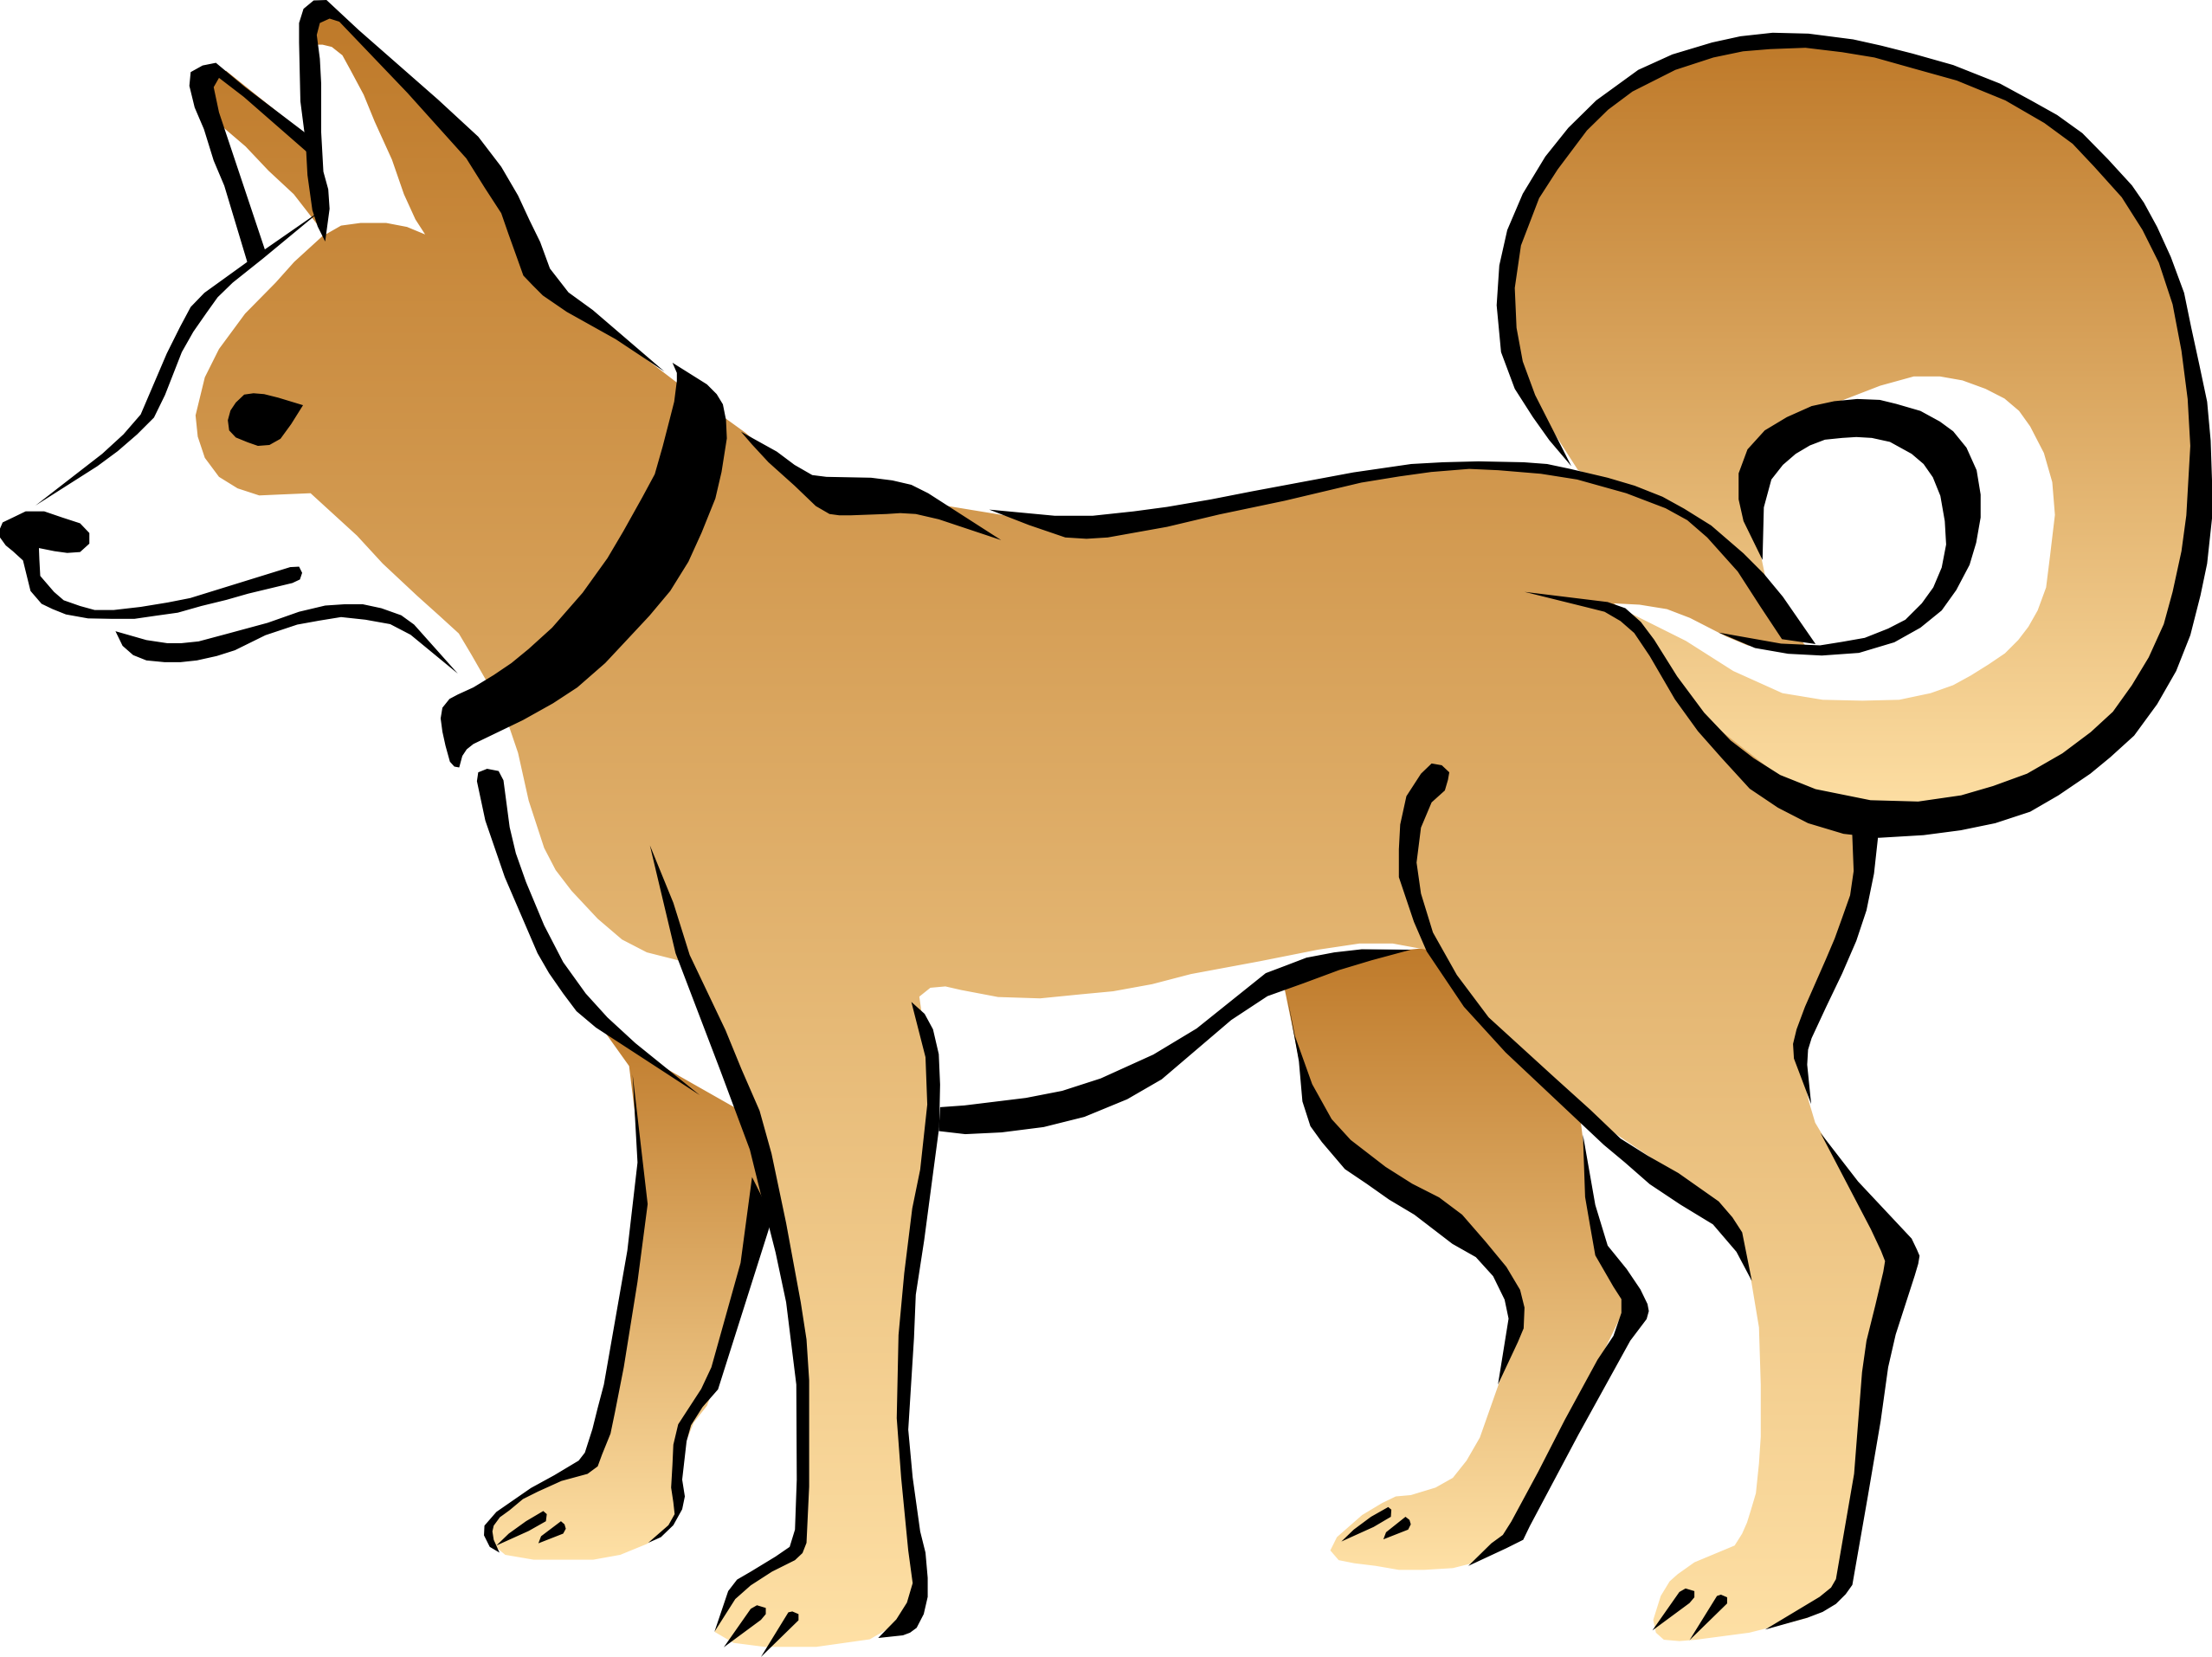 free vector dog clipart - photo #44